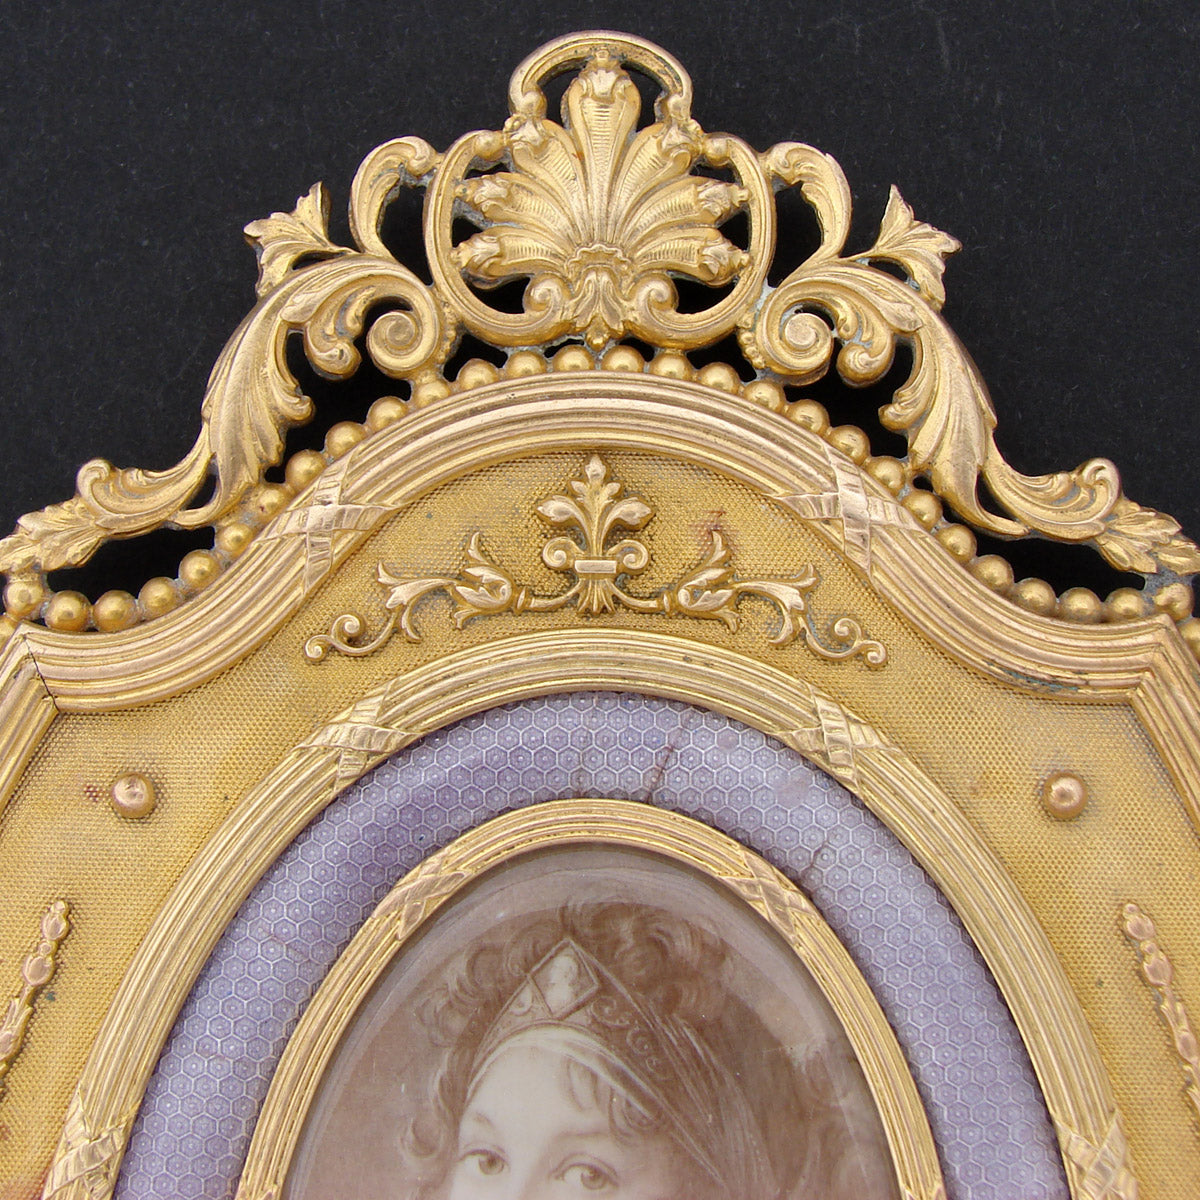 Antique French Dore Bronze Empire Hand Mirror, Portrait Miniature in Grisaille, Marie-Louise, Kiln-fired Enamel Mat